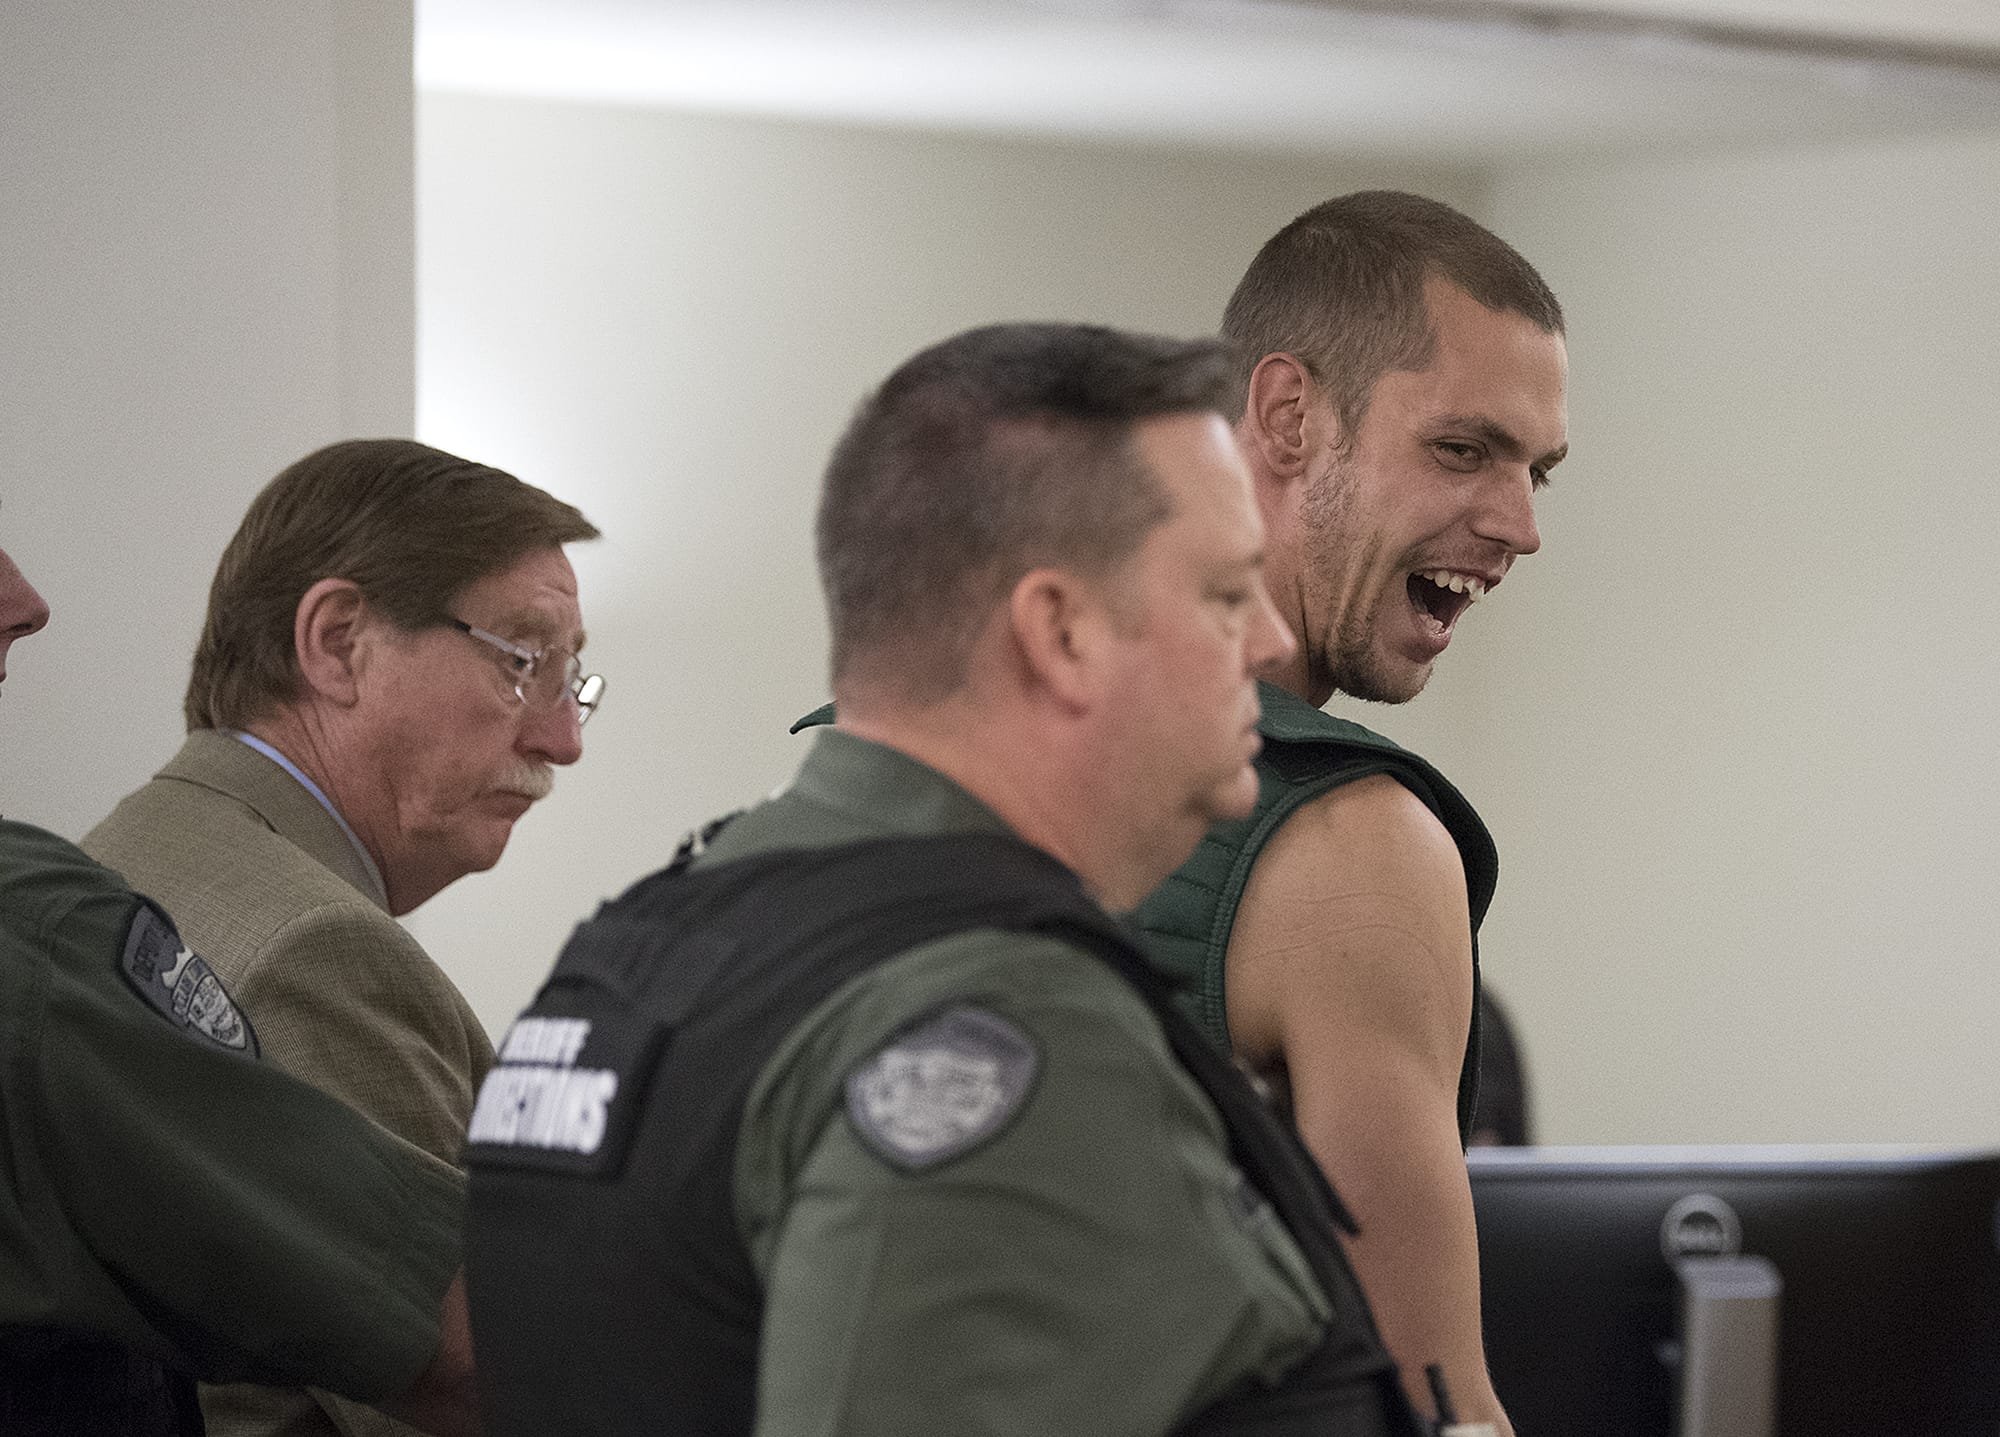 Zakary French, 24, right, makes a first appearance on suspicion of first-degree assault in Clark County Superior Court on Thursday morning, April 12, 2018. French is accused of stabbing his 69-year-old grandfather in the neck Wednesday.